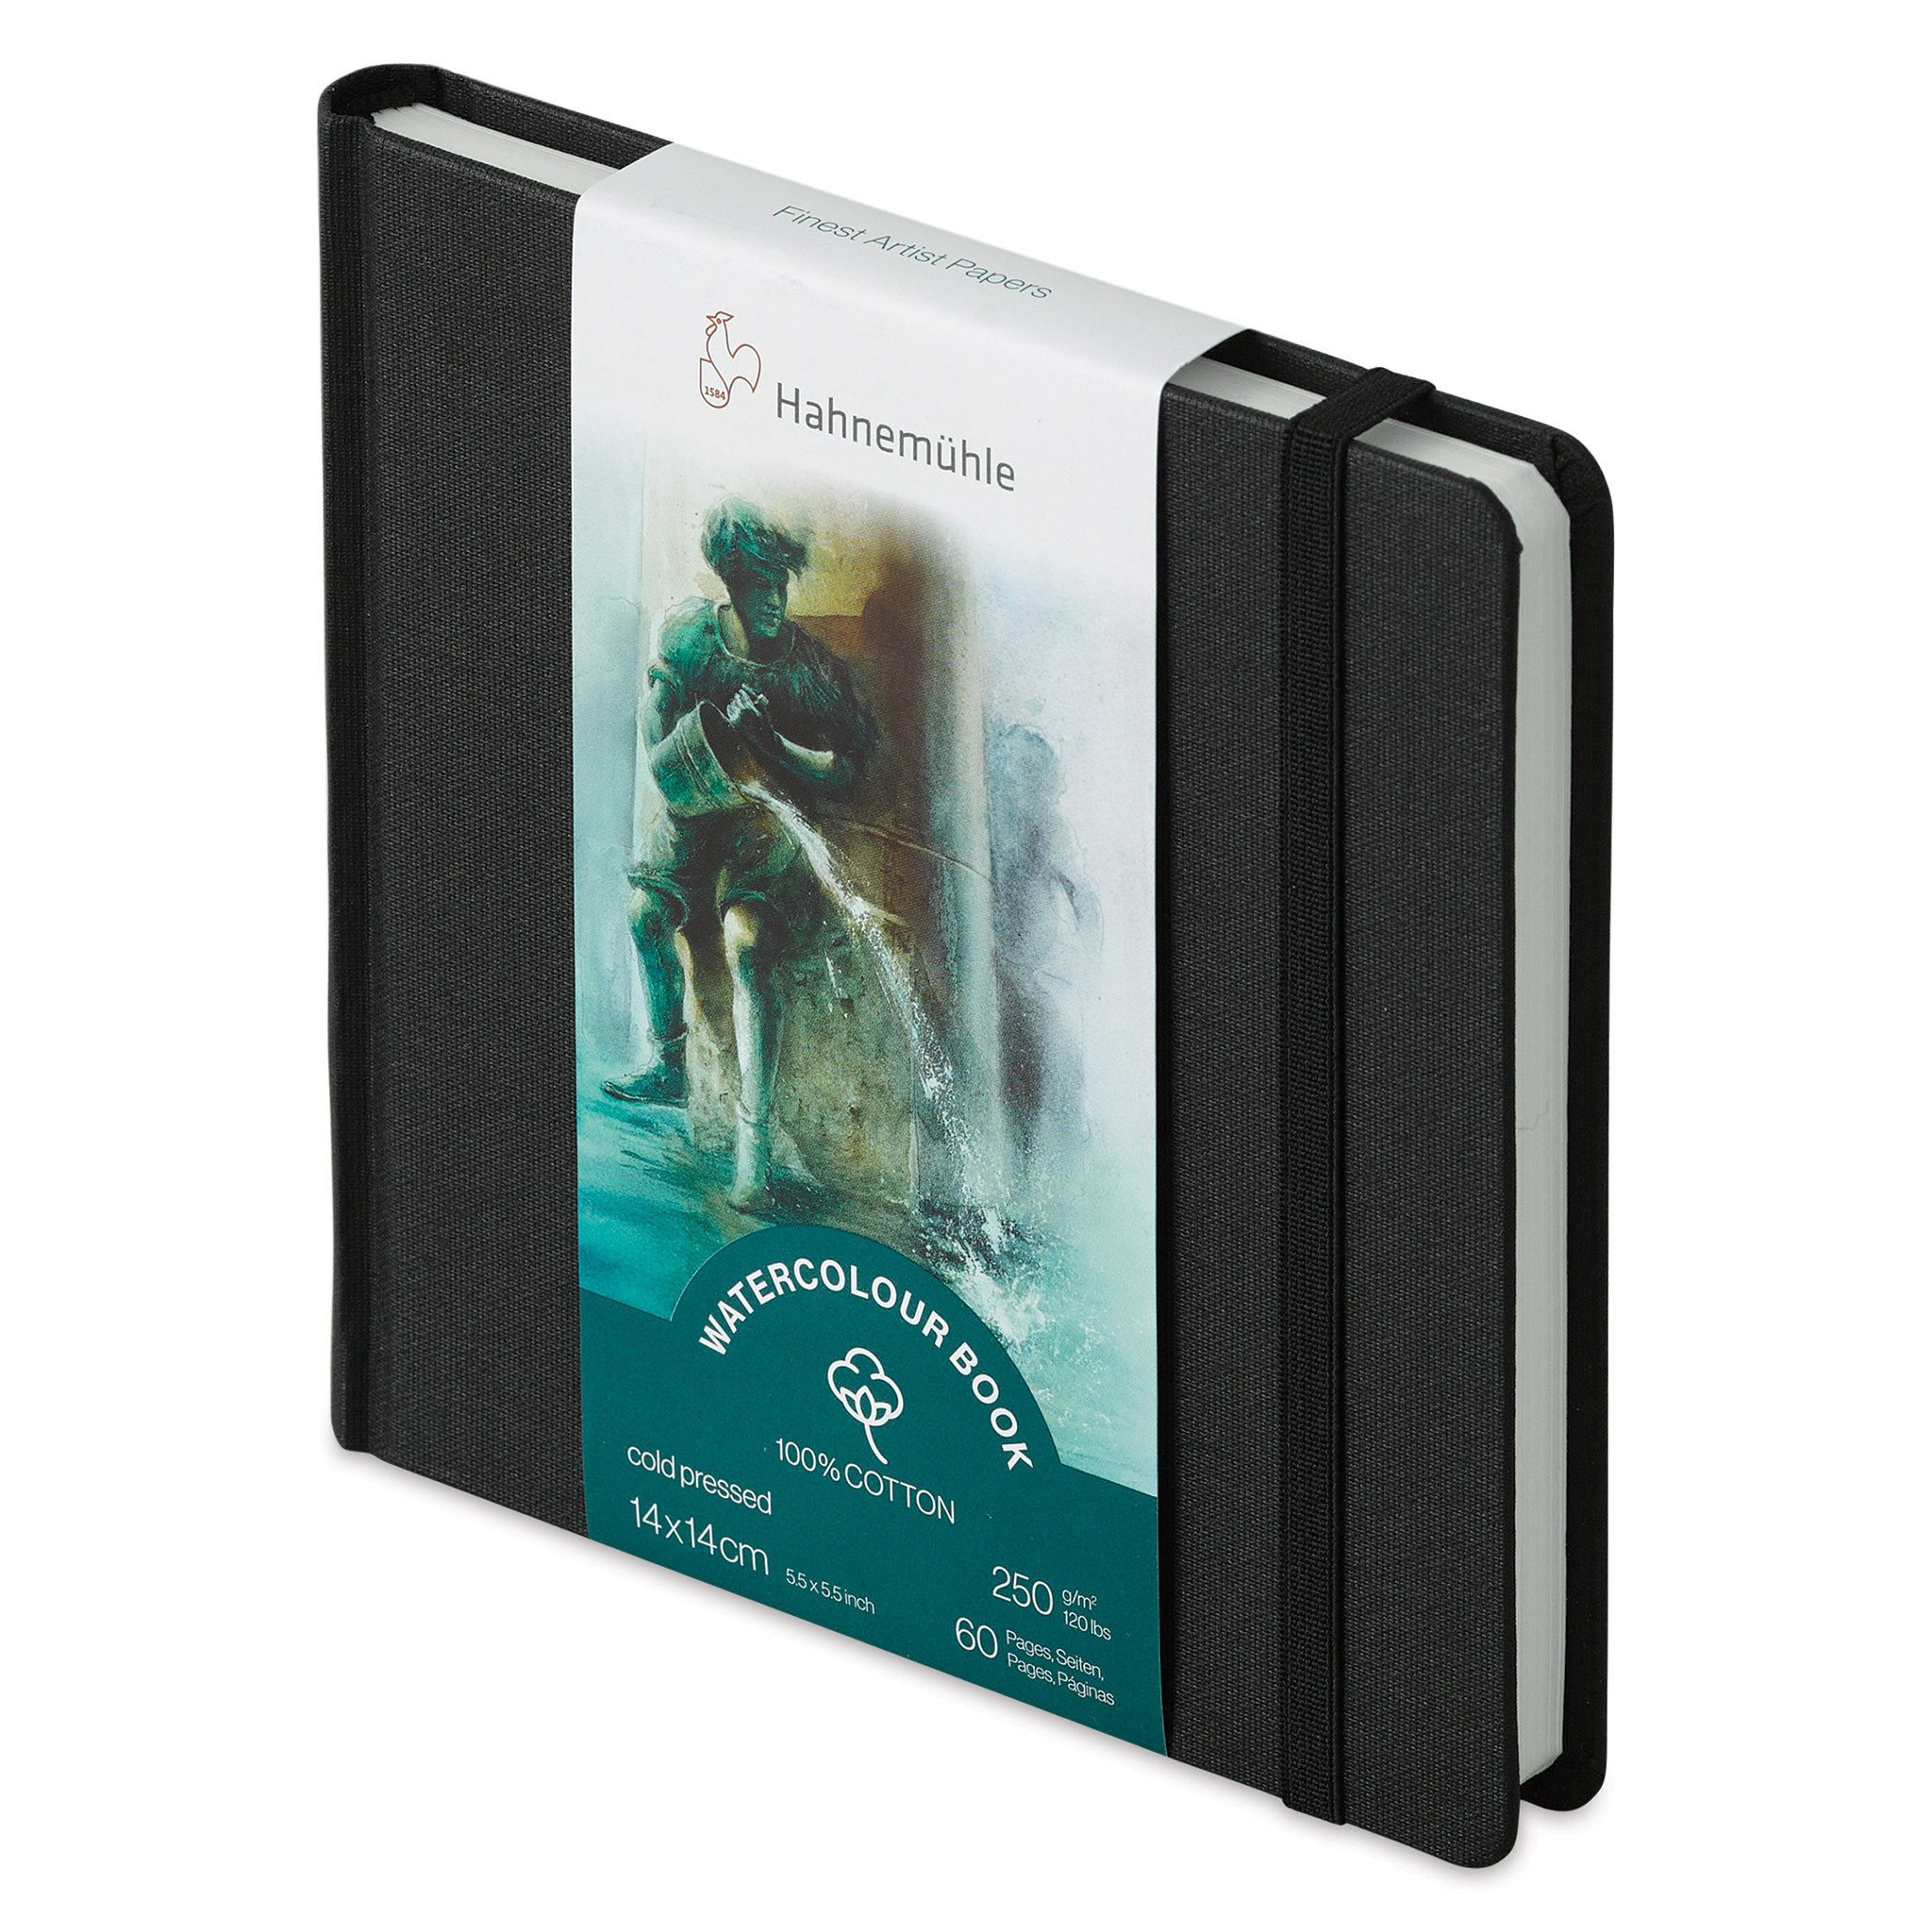 Hahnemhle Watercolor Book - 5.5 inch x 5.5 inch, 60 Pages, Square